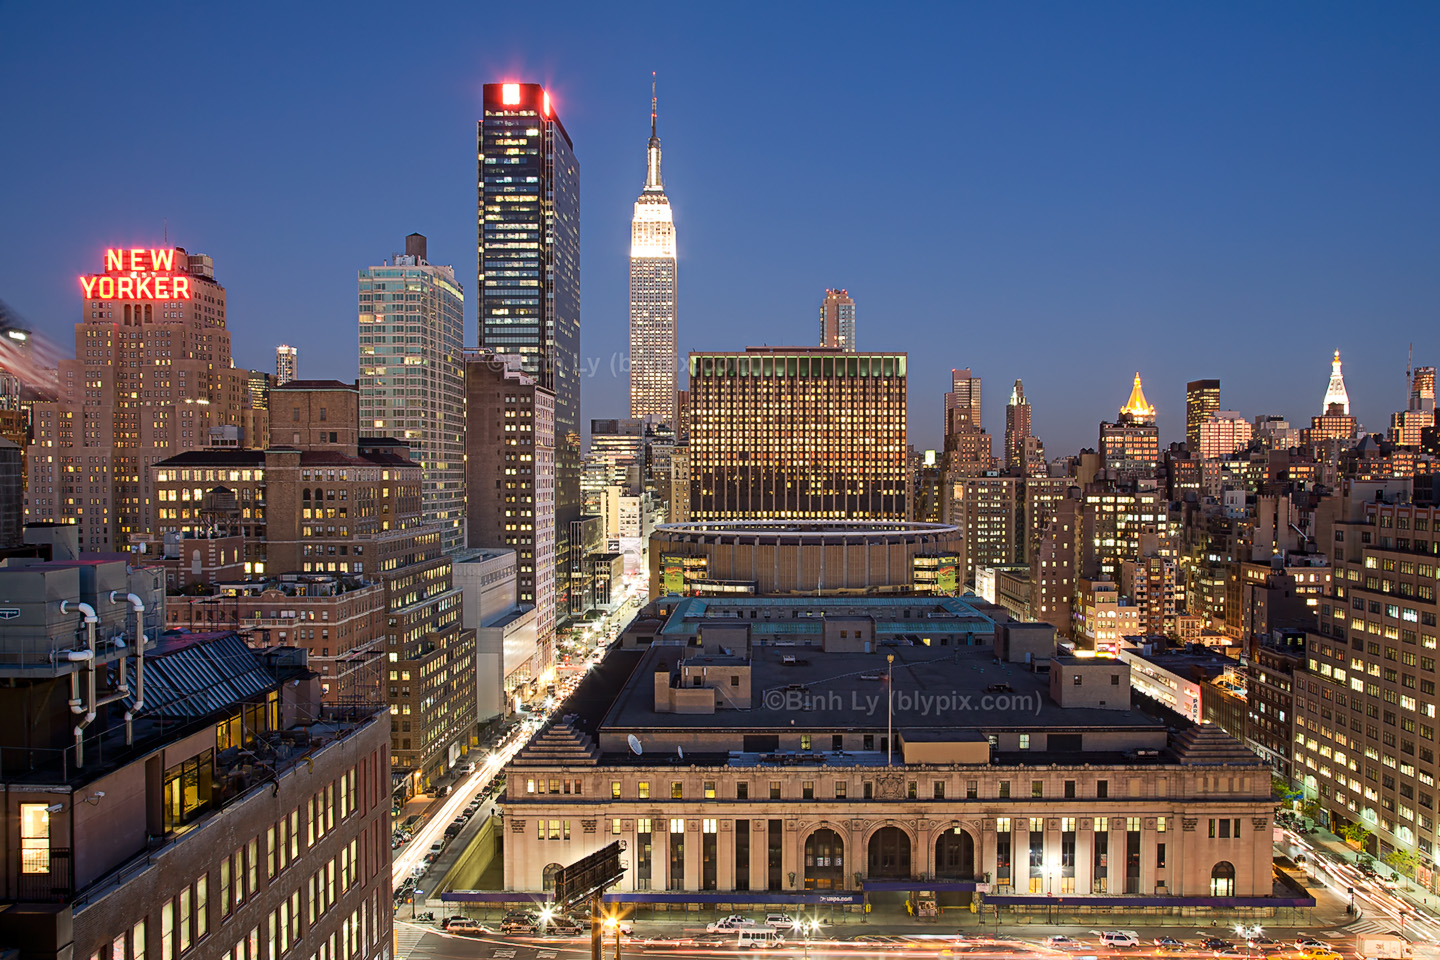 State Building Post Office And The Midtown New York City Skyline